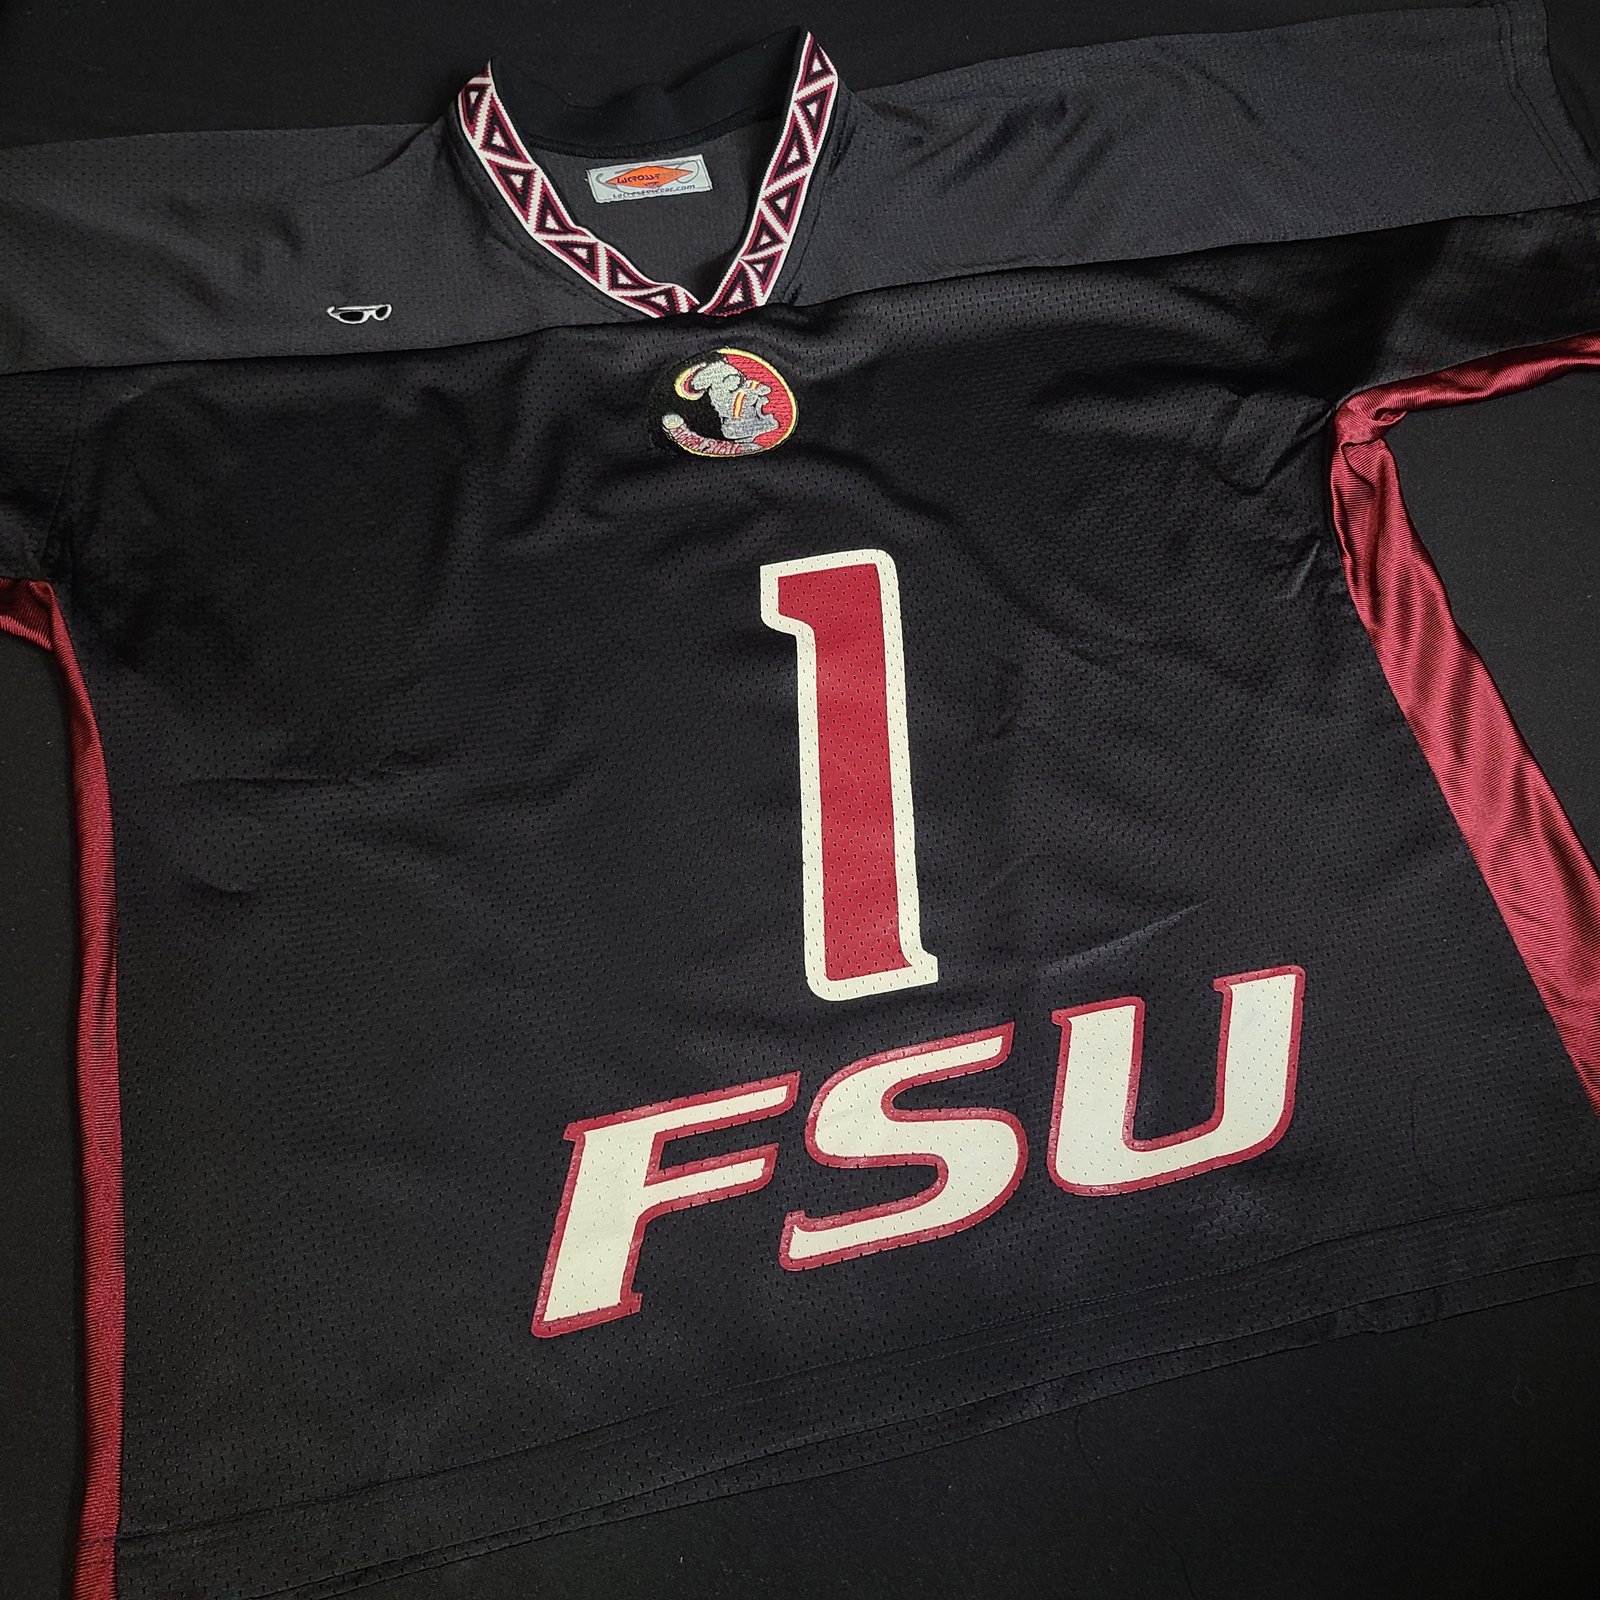 Florida State Seminoles lacrosse Hall of Fame jersey